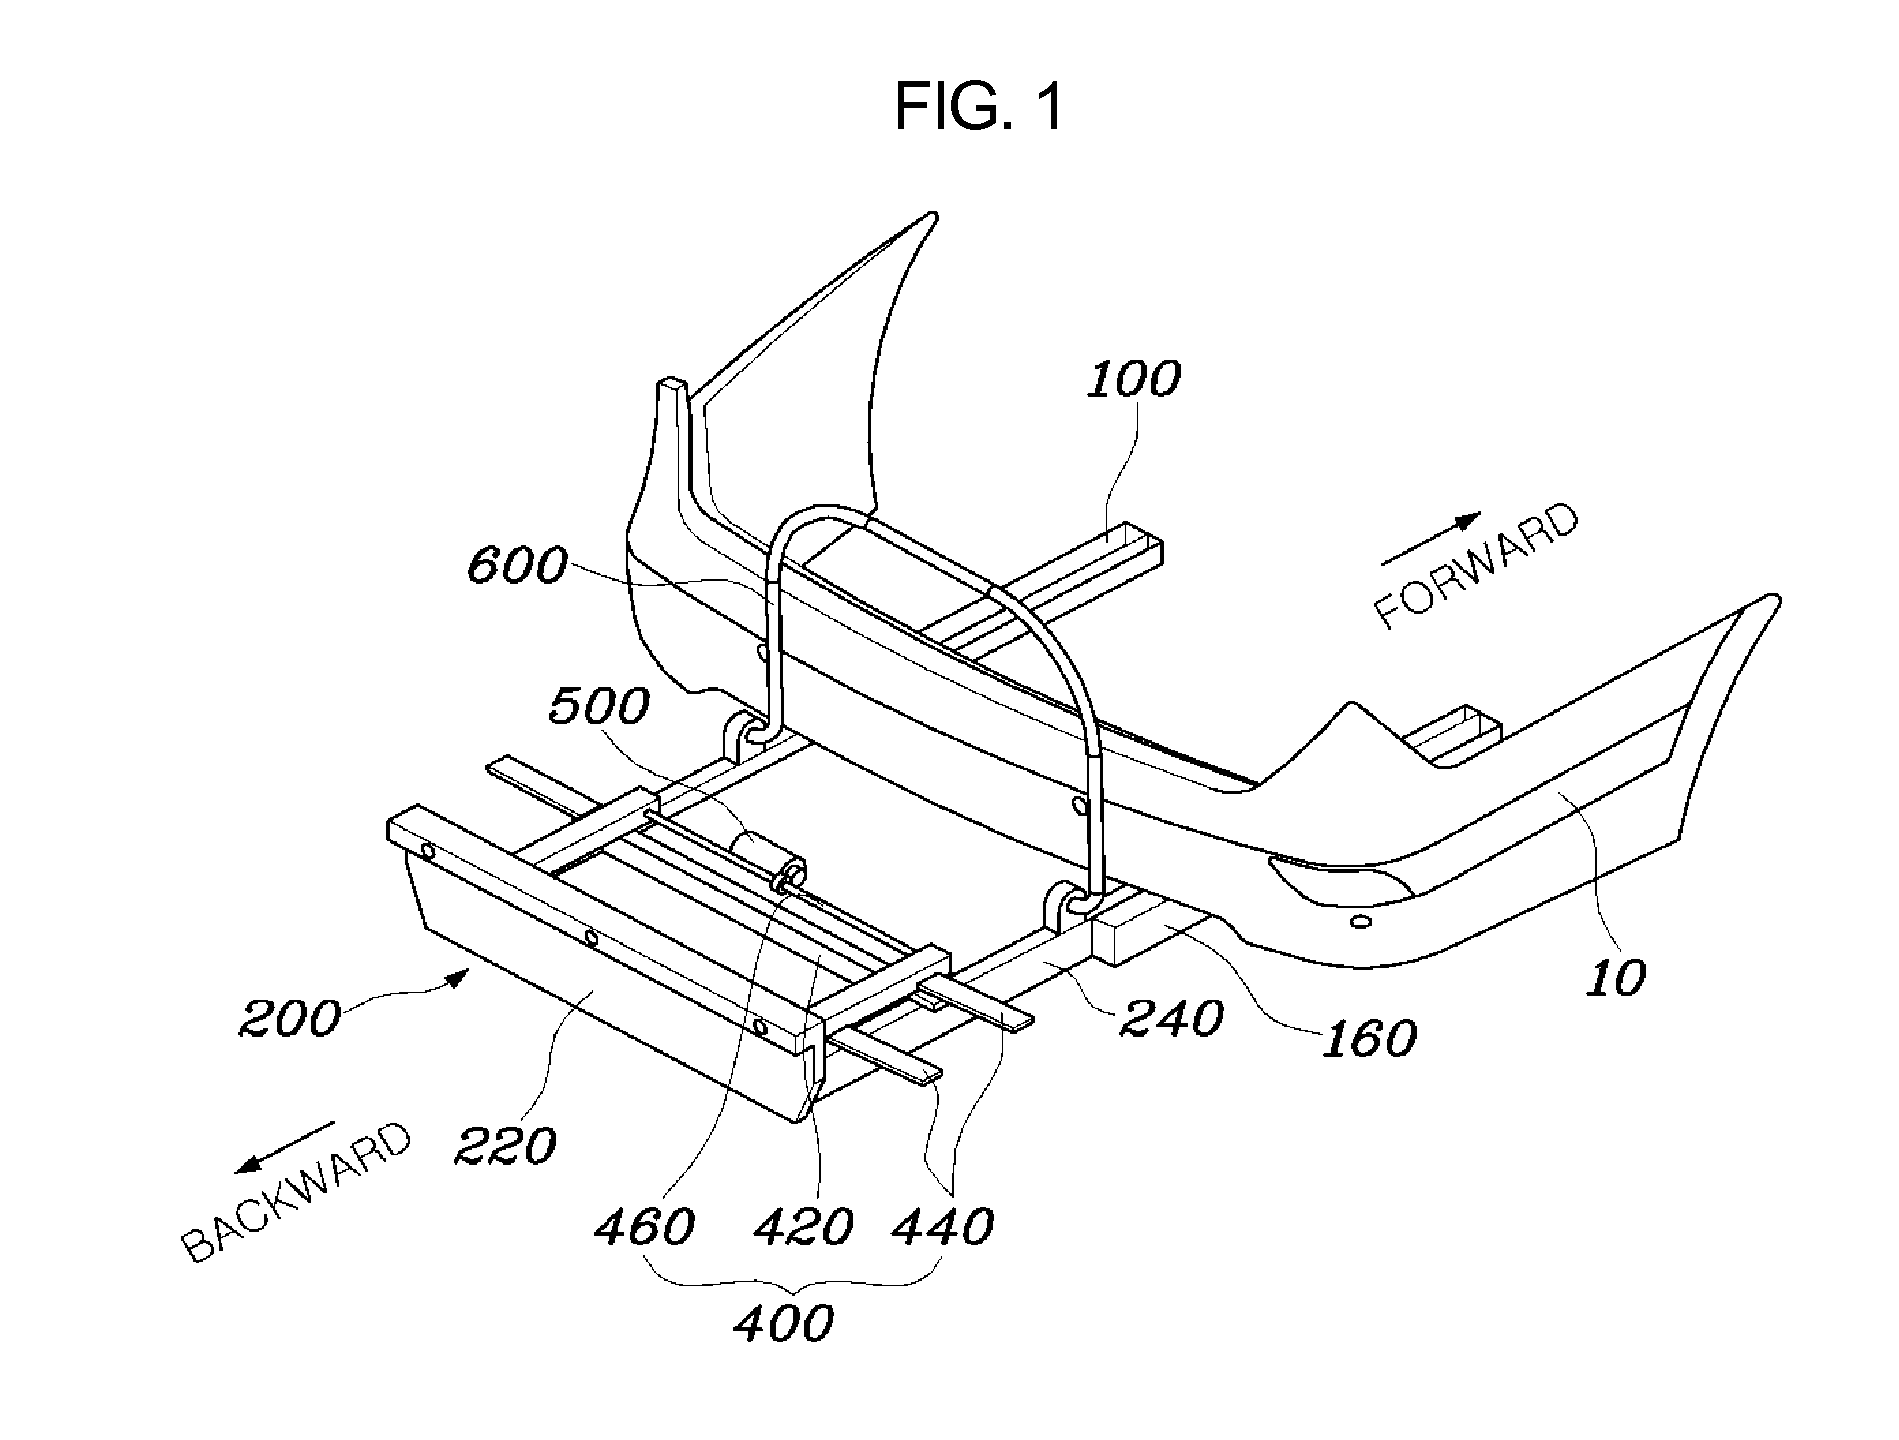 Bicycle carrier apparatus for vehicle